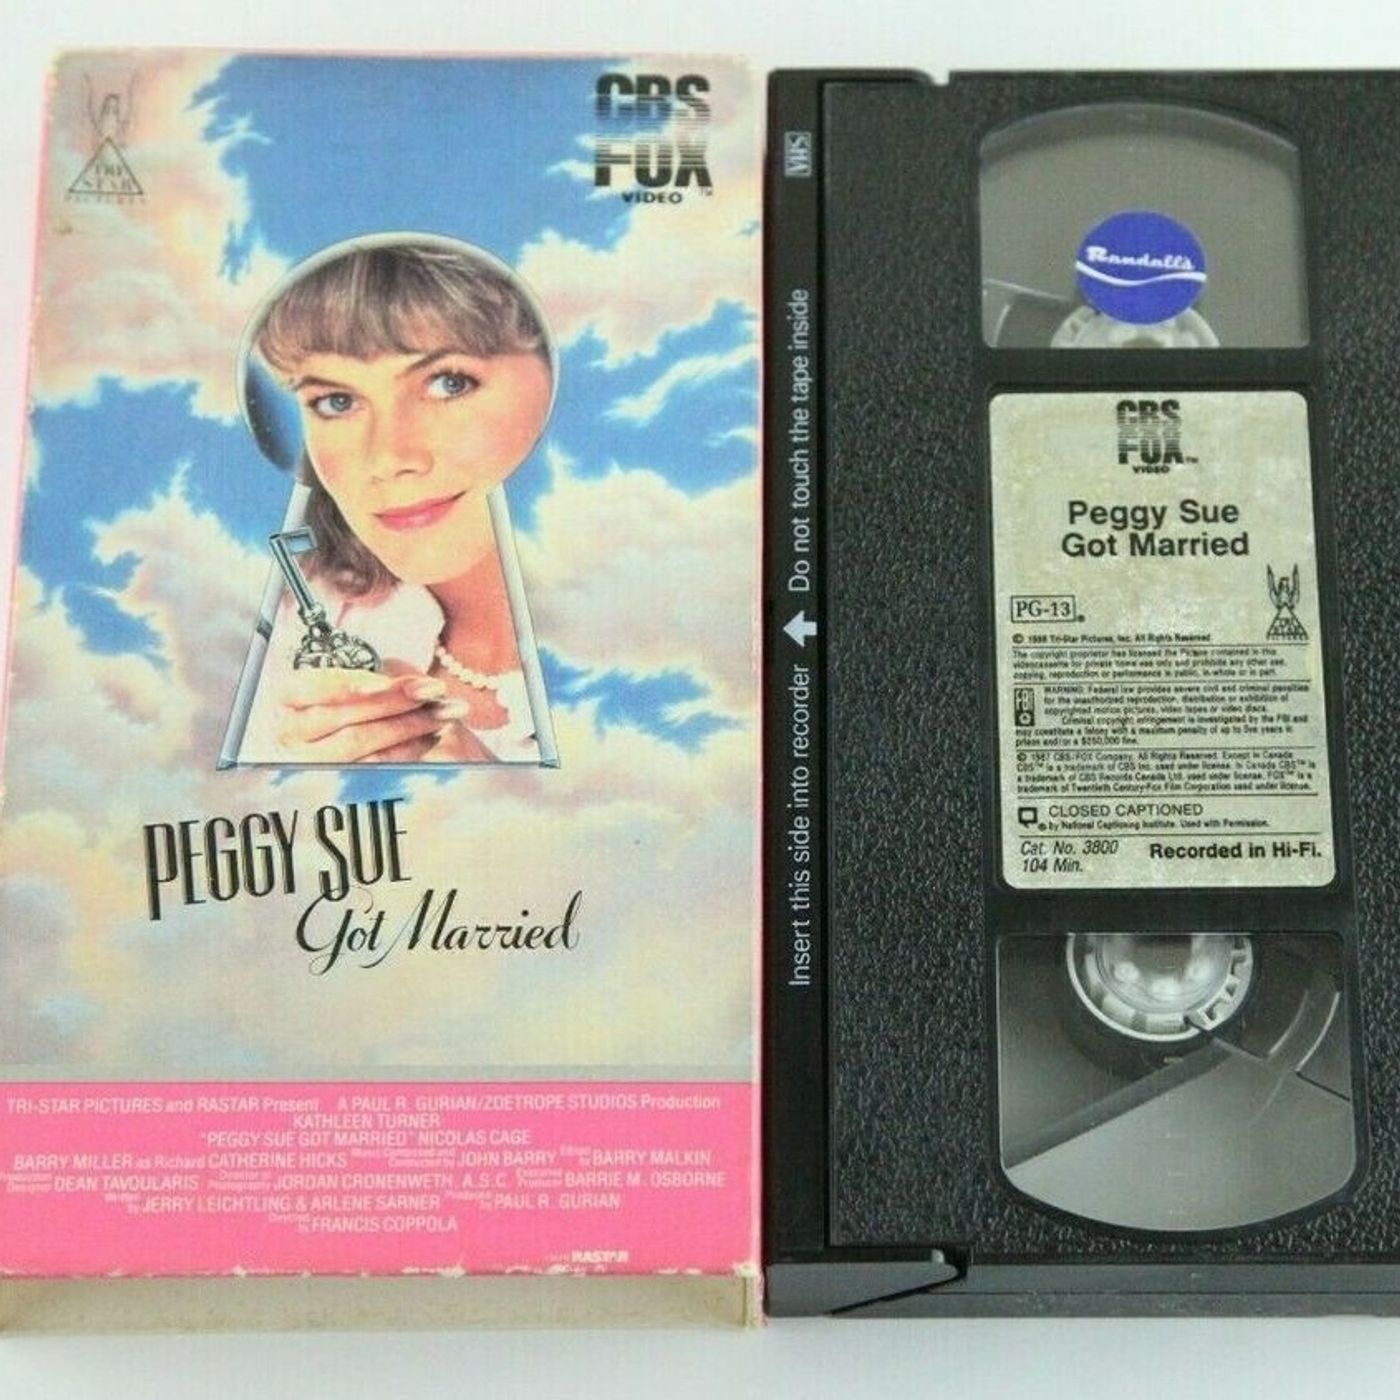 1986 - Peggy Sue Got Married Image